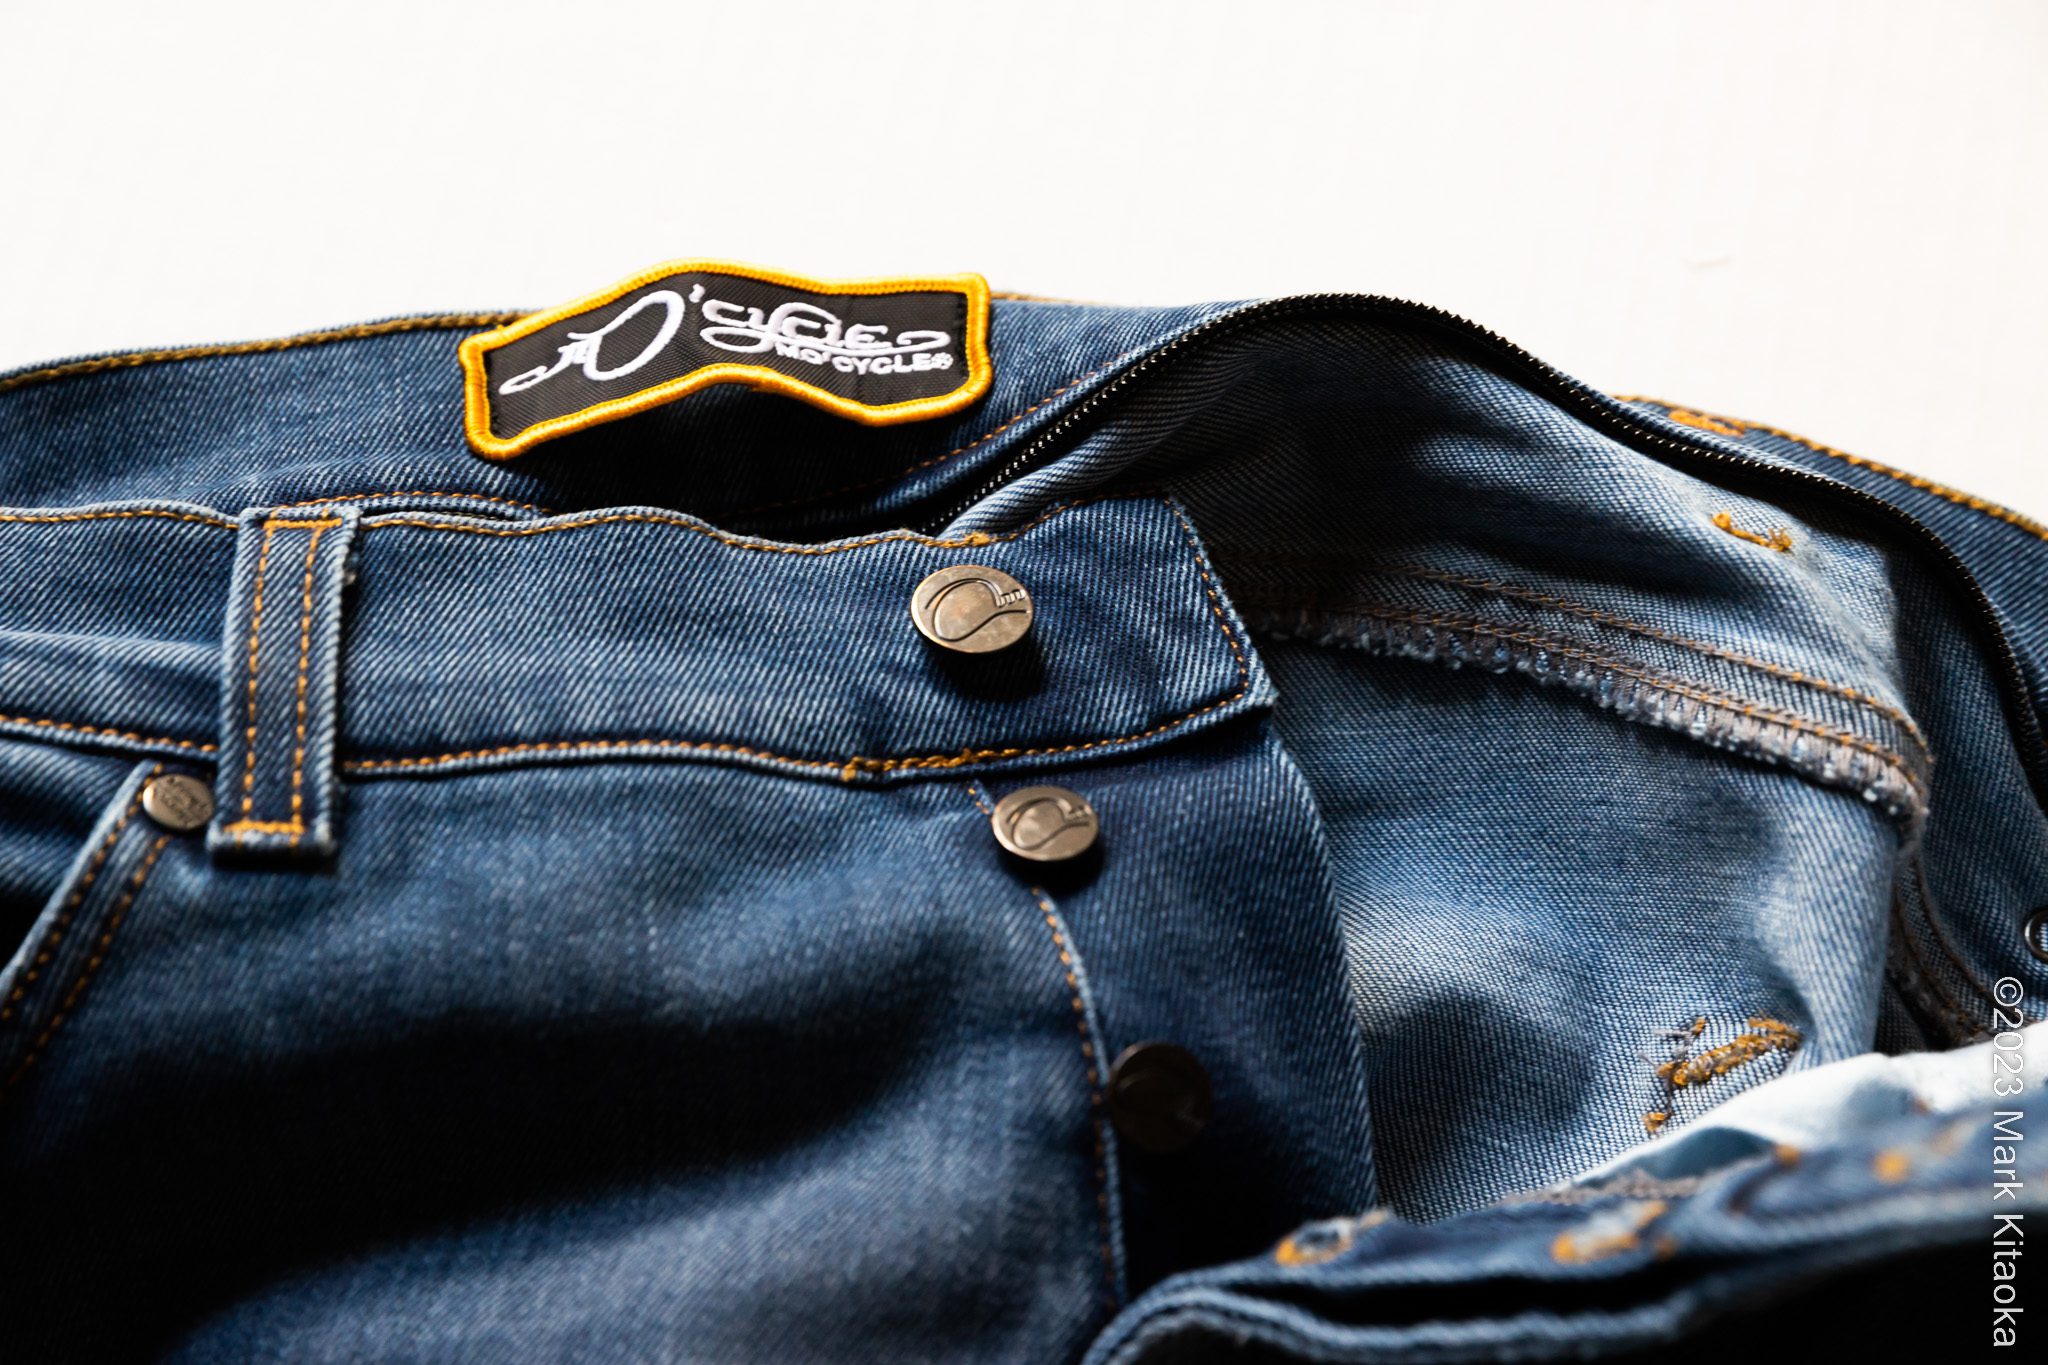 Button fly on the front of the jeans